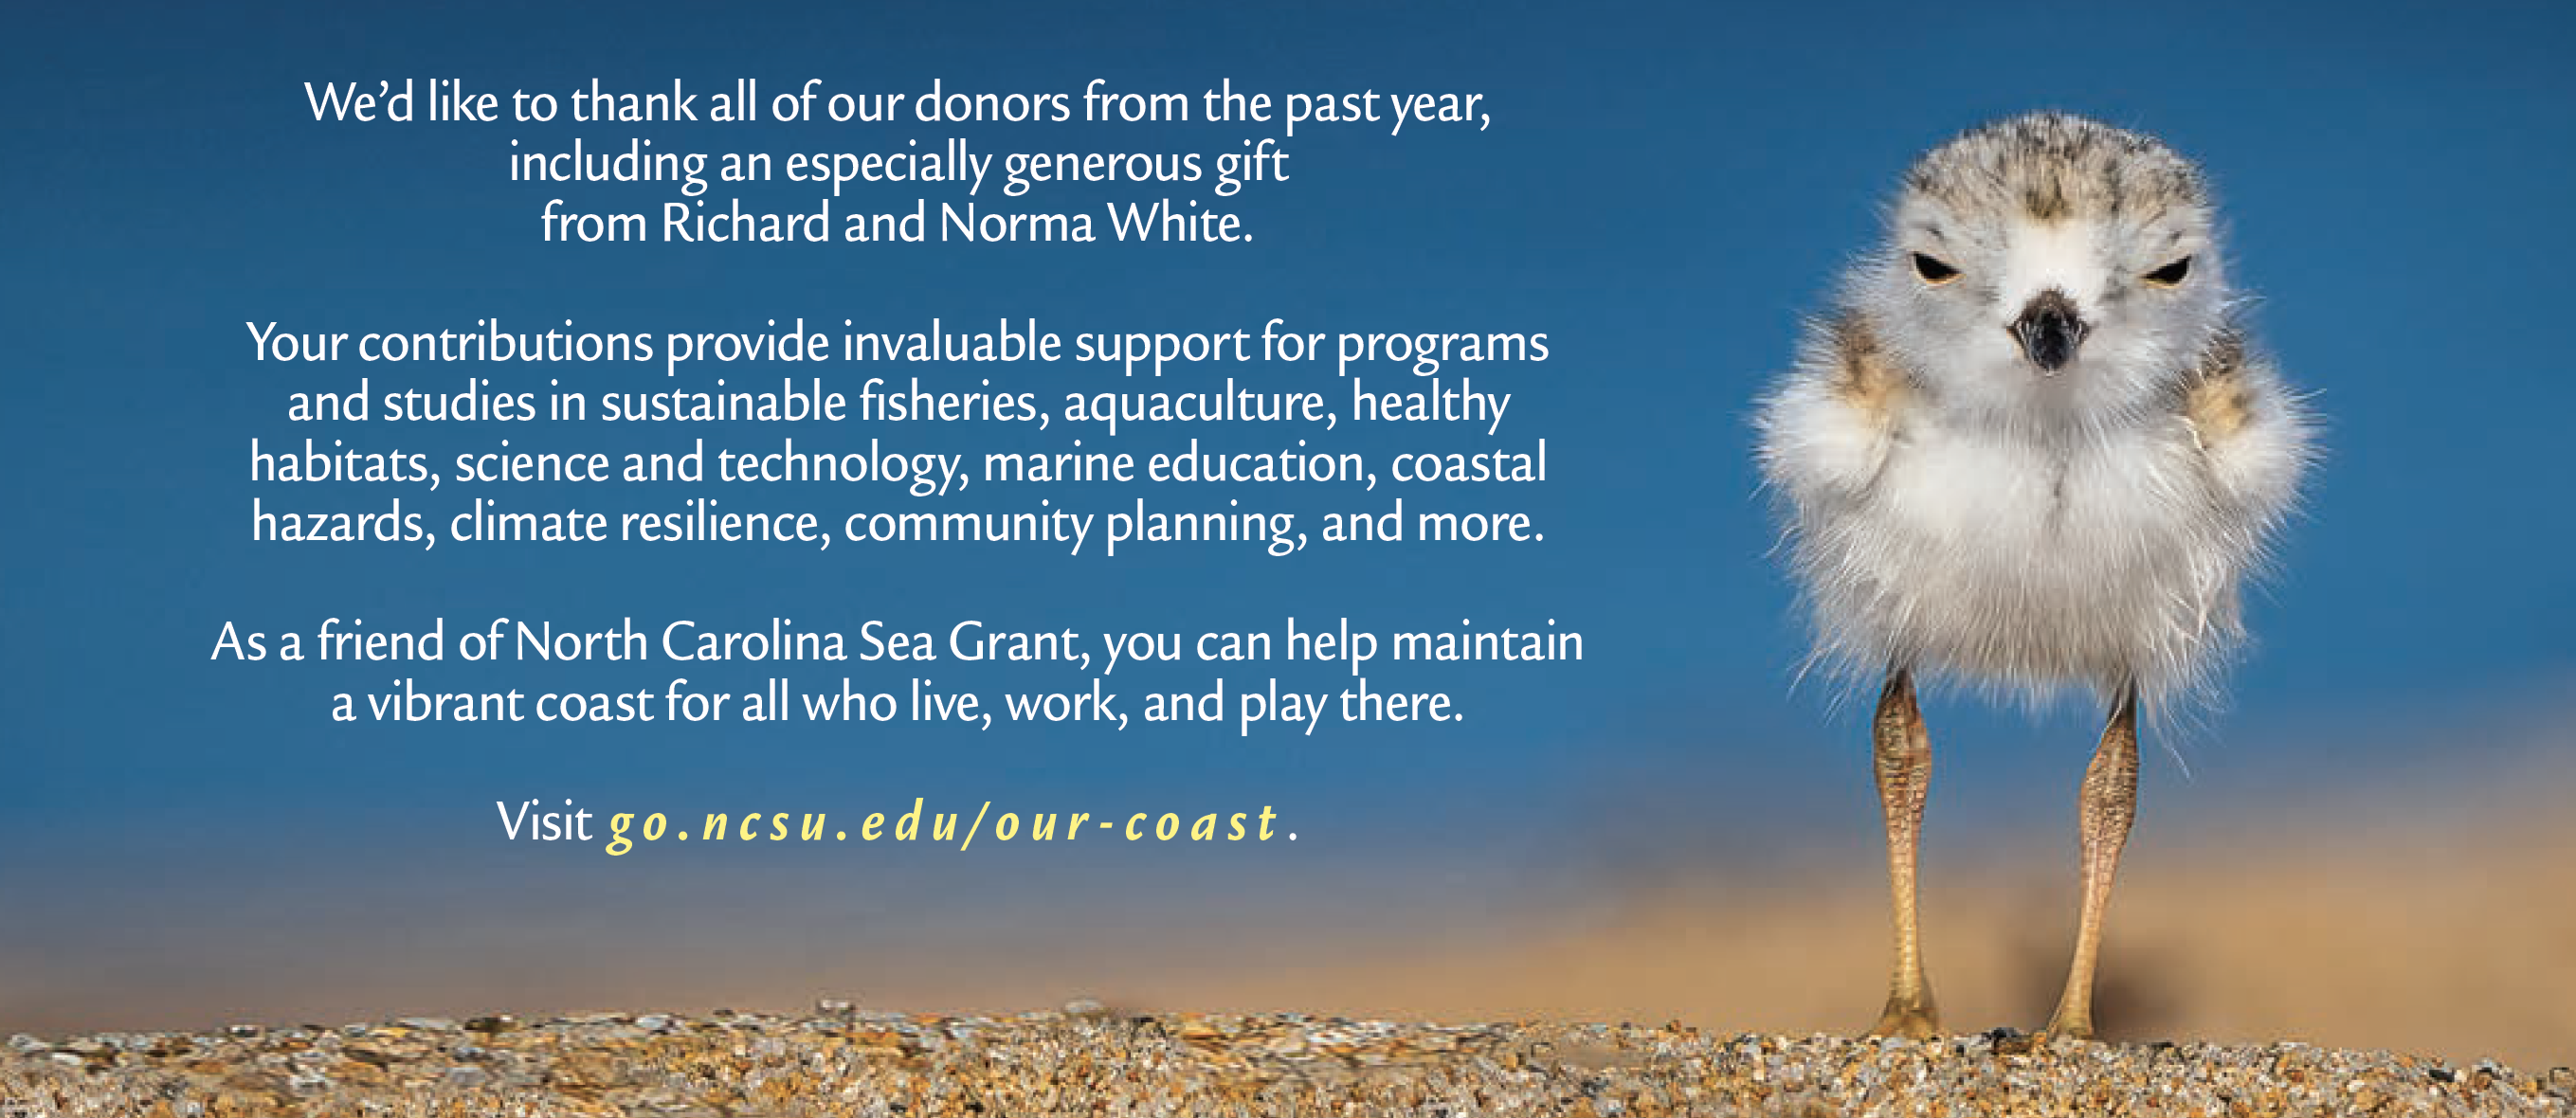 back cover of the Summer 2023 issue of Coastwatch, thanking donors and featuring a piping plover.